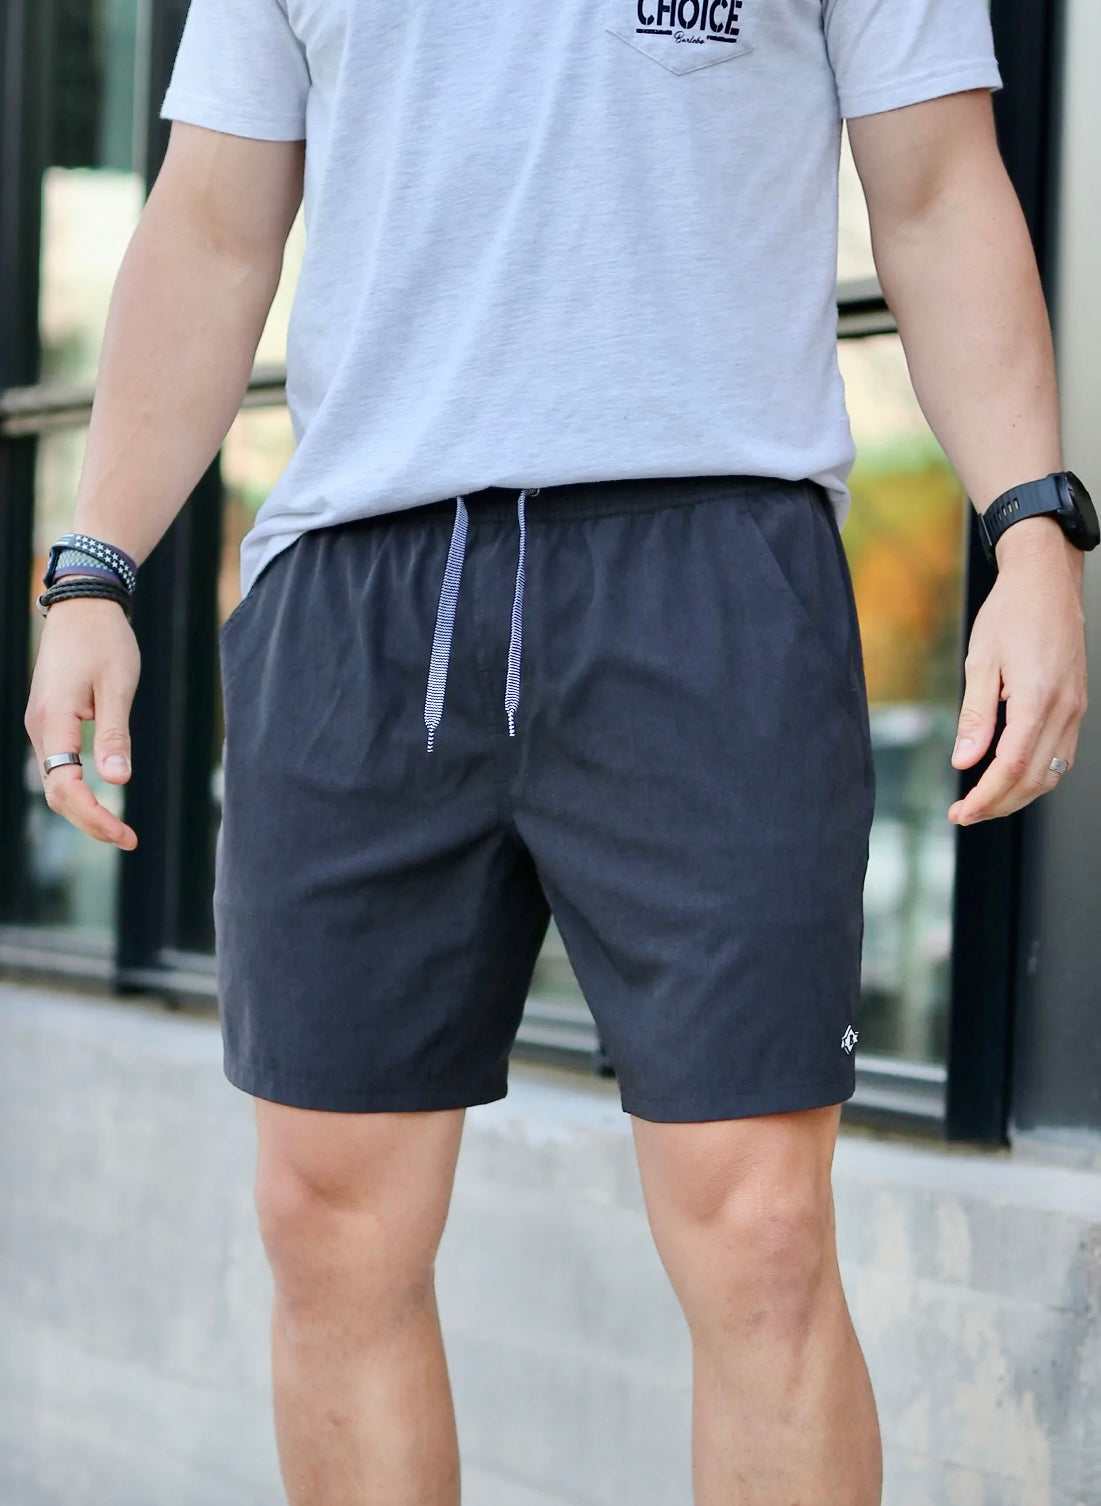 Men’s black athletic shorts that are Quick Drying, Moisture Wicking, and Four-Way Stretch